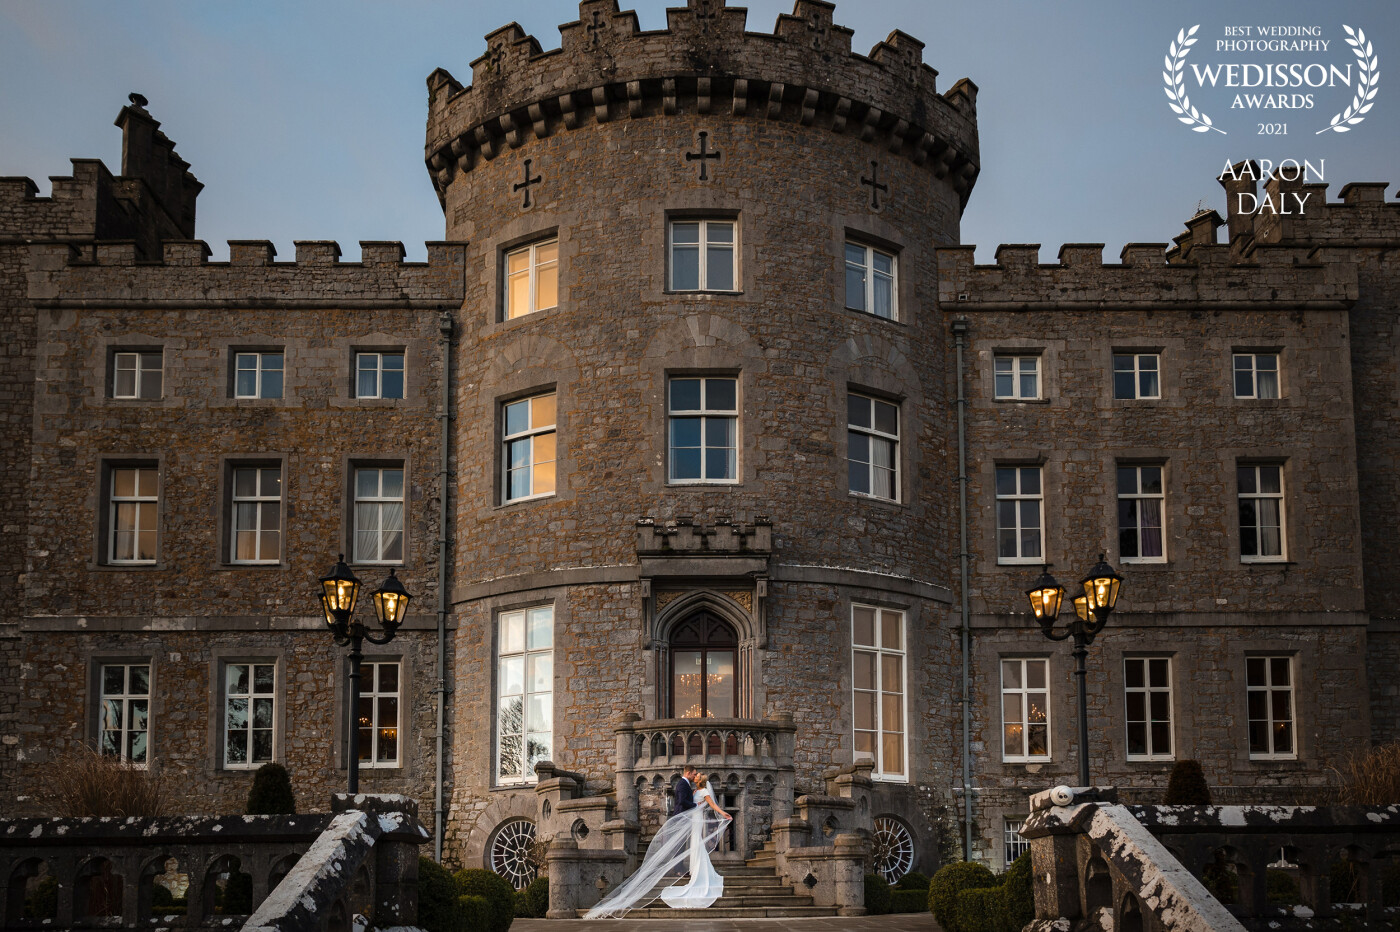 Sharon & Jonathans Irish castle wedding in December 2020 was simply amazing. Despite the restrictions they went ahead,  celebrated at Markree Castle in County Sligo and were rewarded with sunshine and spectacular backdrops for their wedding day. 